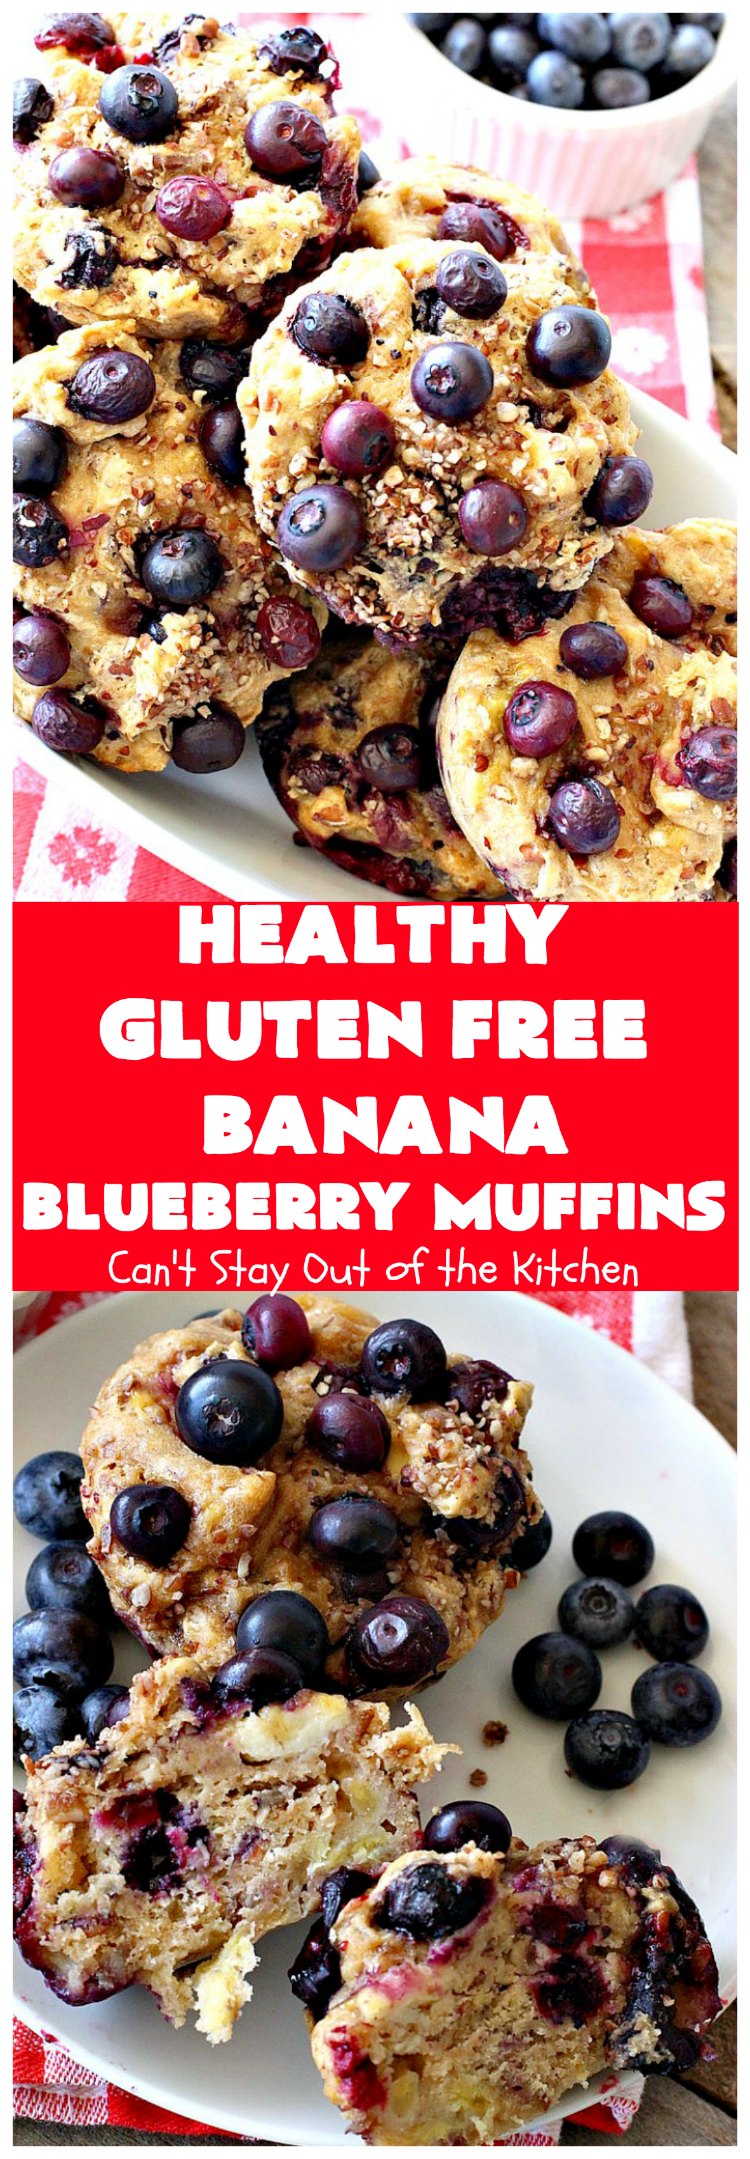 Healthy Gluten Free Banana Blueberry Muffins | Can't Stay Out of the Kitchen | these amazing #blueberry #muffins are perfect for a #company or #holiday #breakfast like #MothersDay or #FathersDay. This recipe uses #glutenfree flour & coconut sugar for a healthy, clean-eating alternative. #bananas